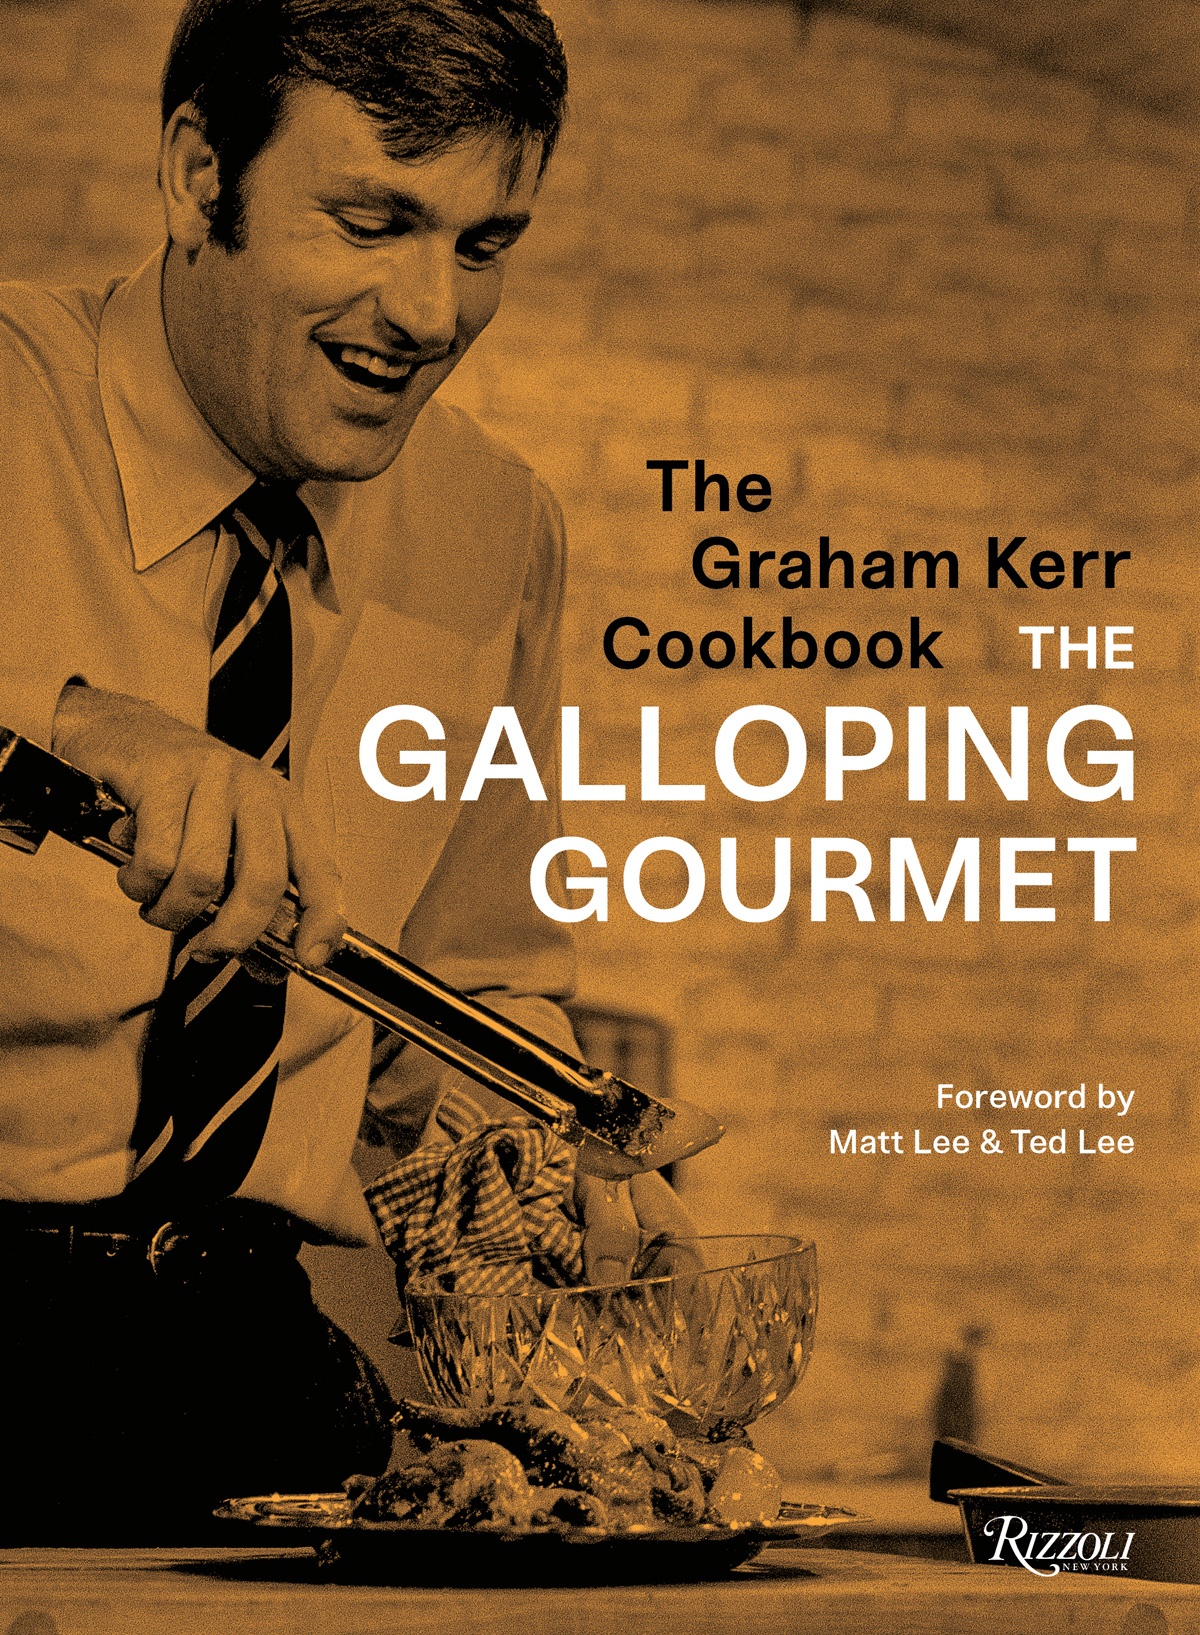 Book cover of The Galloping Gourmet by Graham Kerr